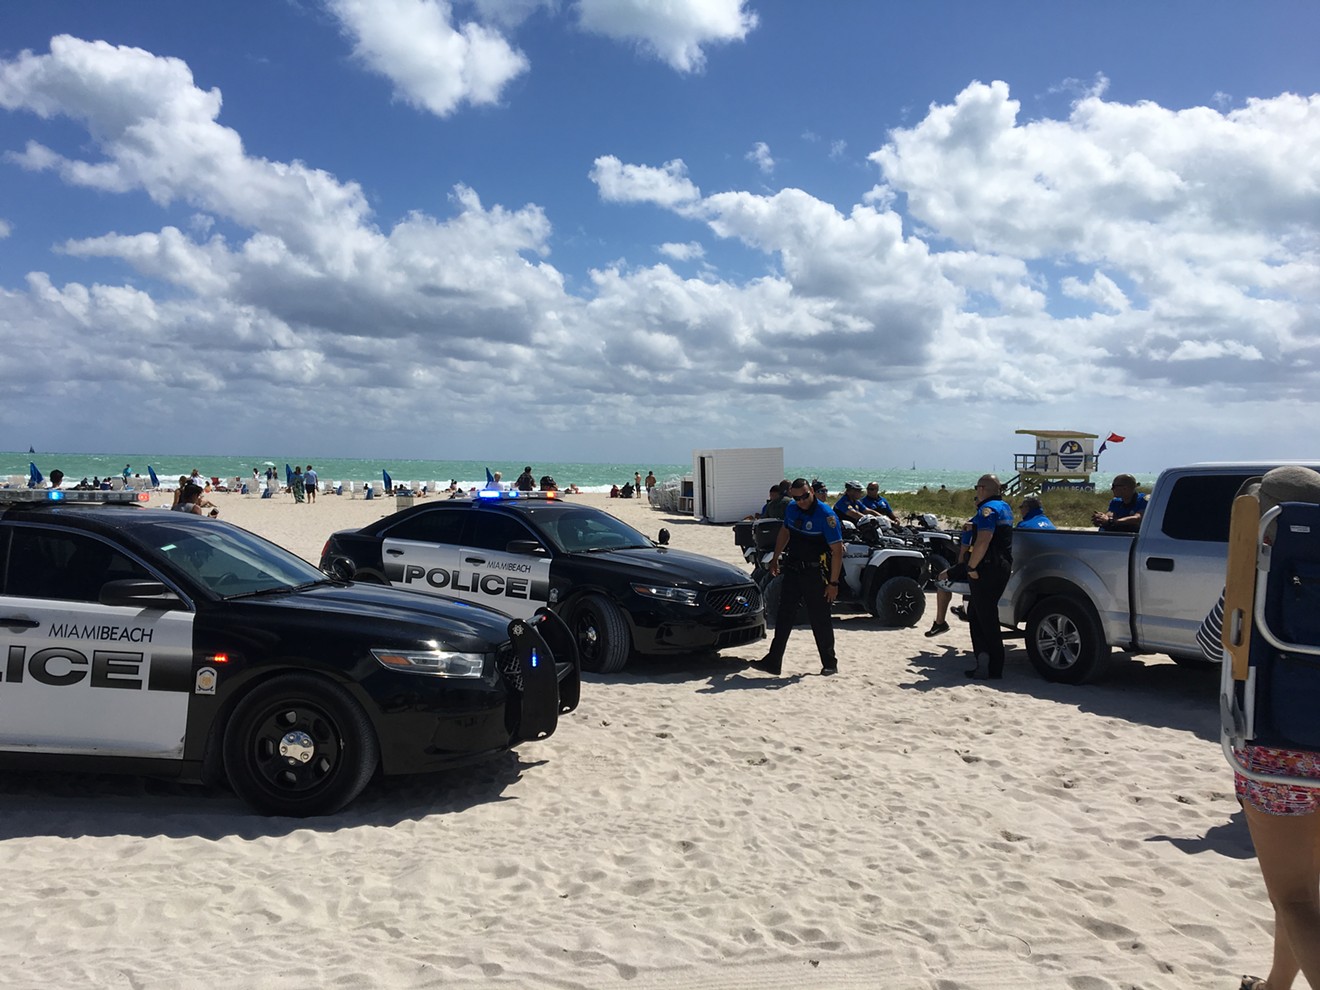 Police were out in force during spring break in Miami Beach.